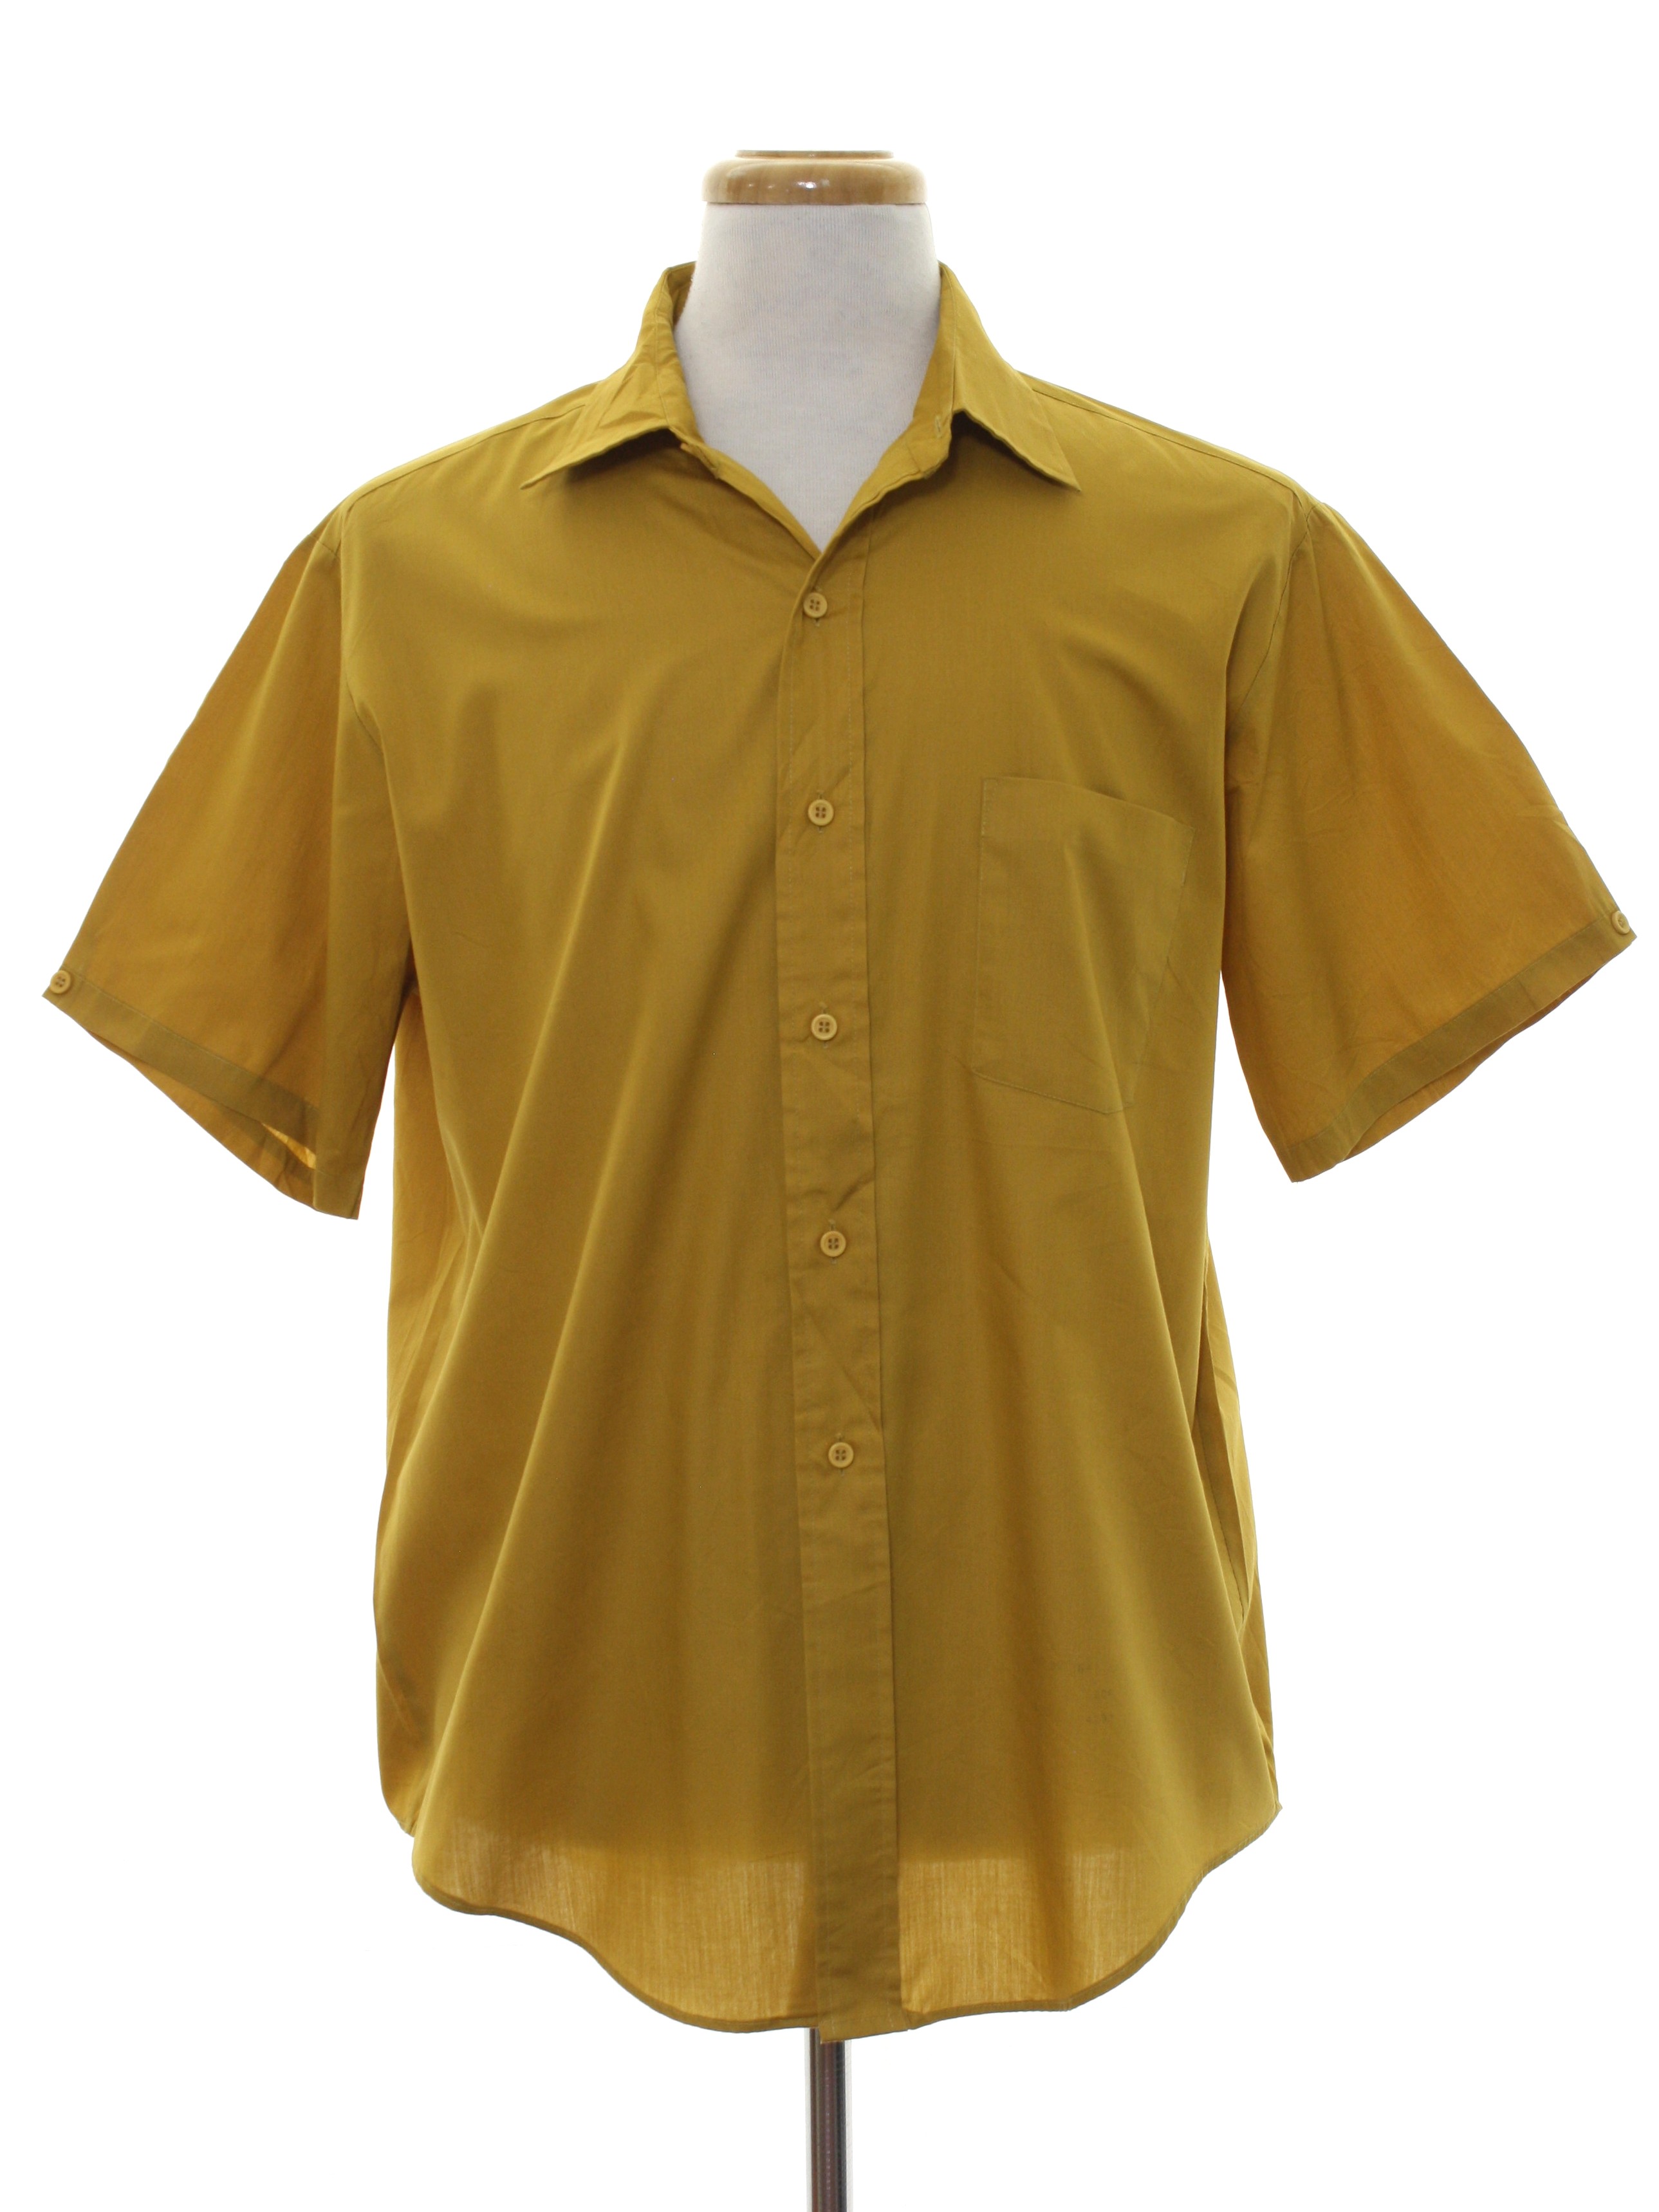 Retro 1960's Shirt (Towncraft) : 60s -Towncraft- Mens harvest gold ...